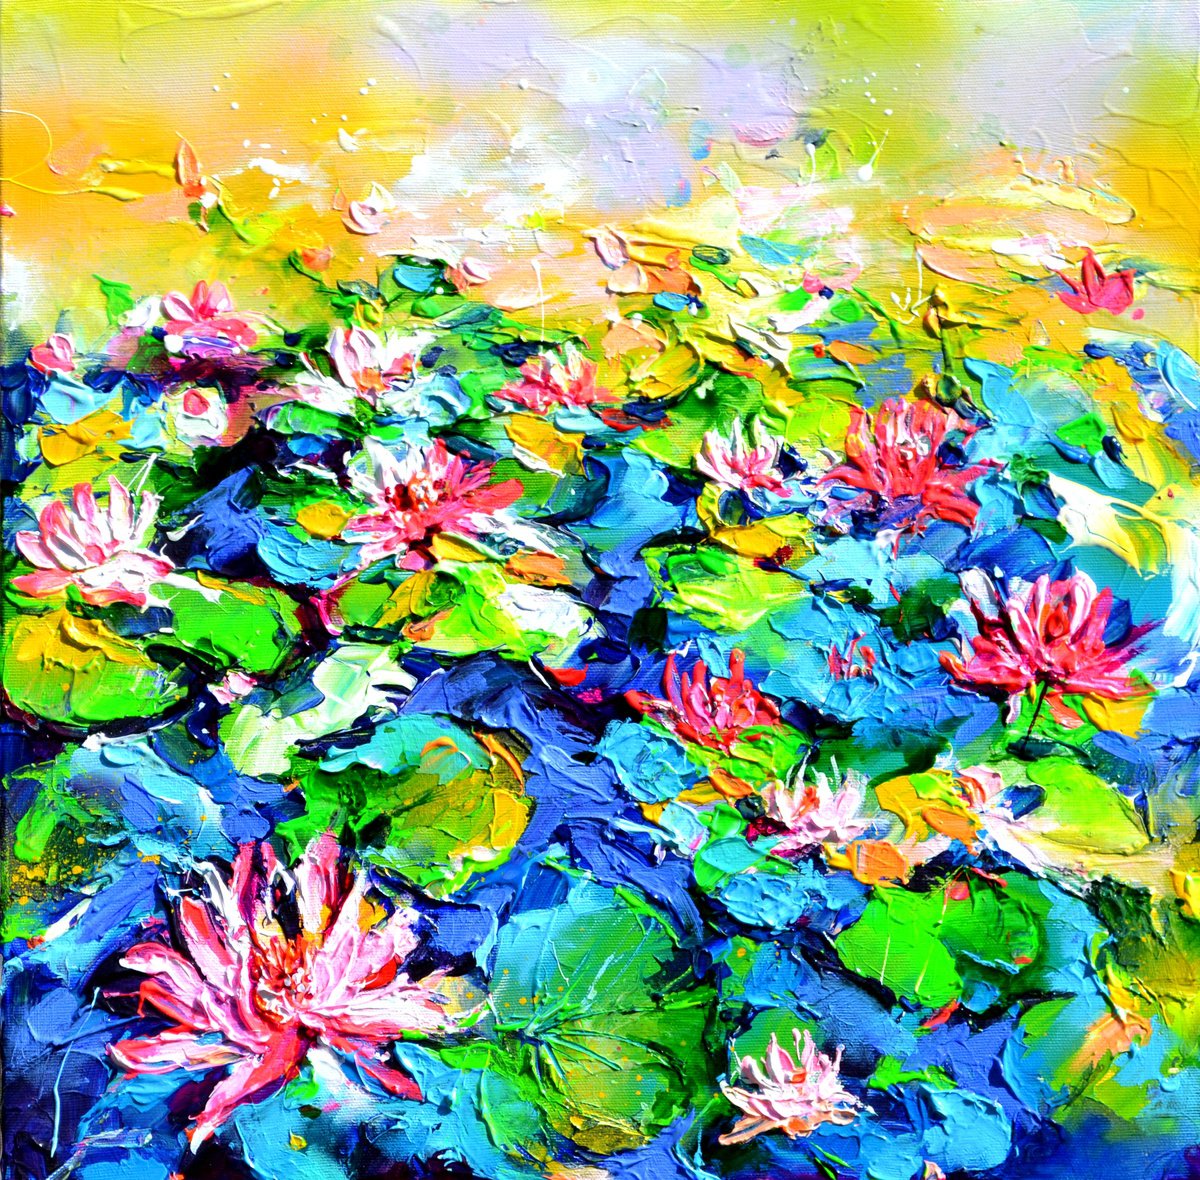 Red Water Lilies on the Pond 2 by Soos Roxana Gabriela